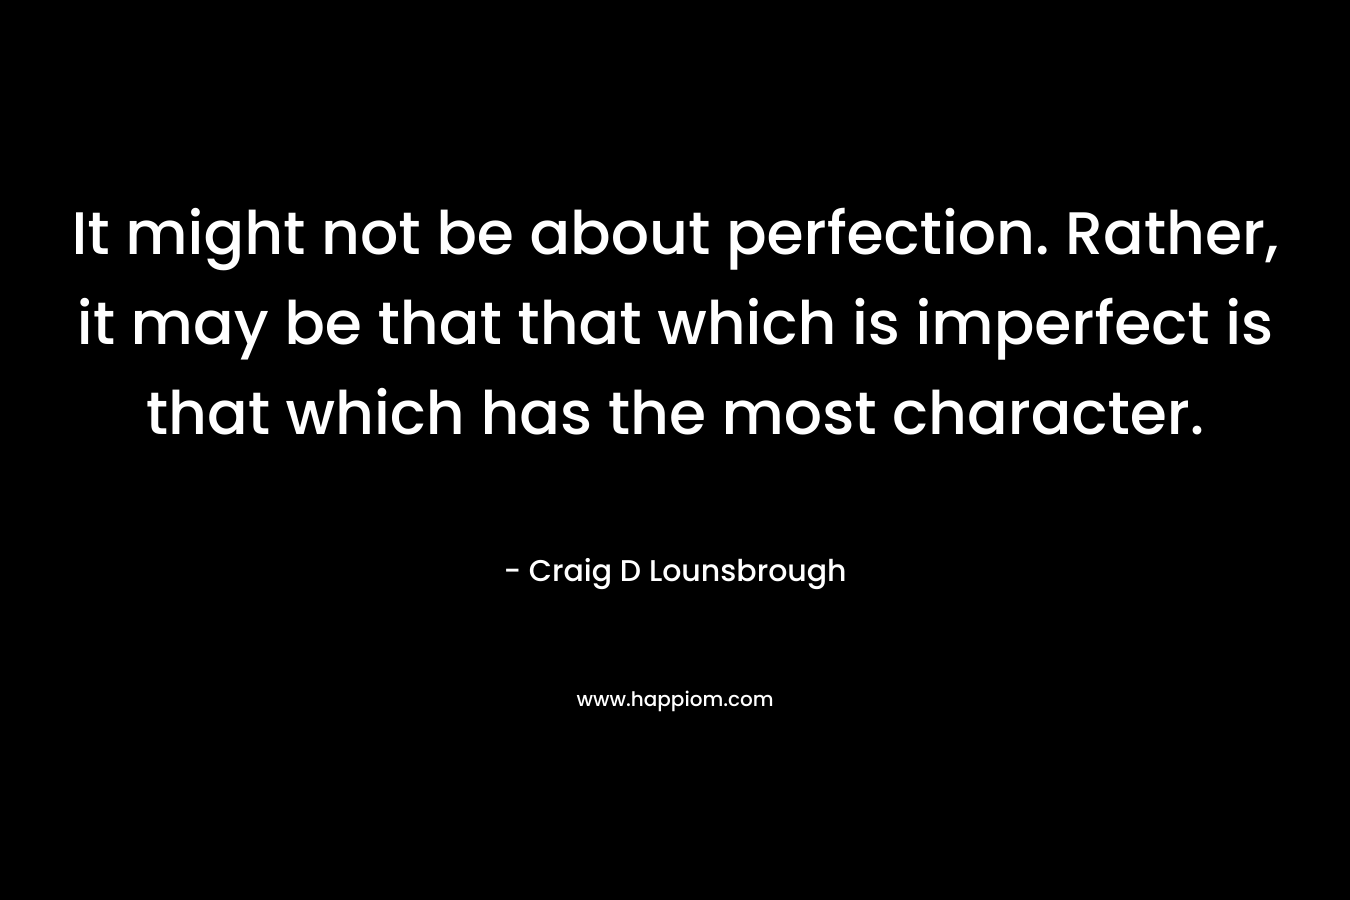 It might not be about perfection. Rather, it may be that that which is imperfect is that which has the most character.